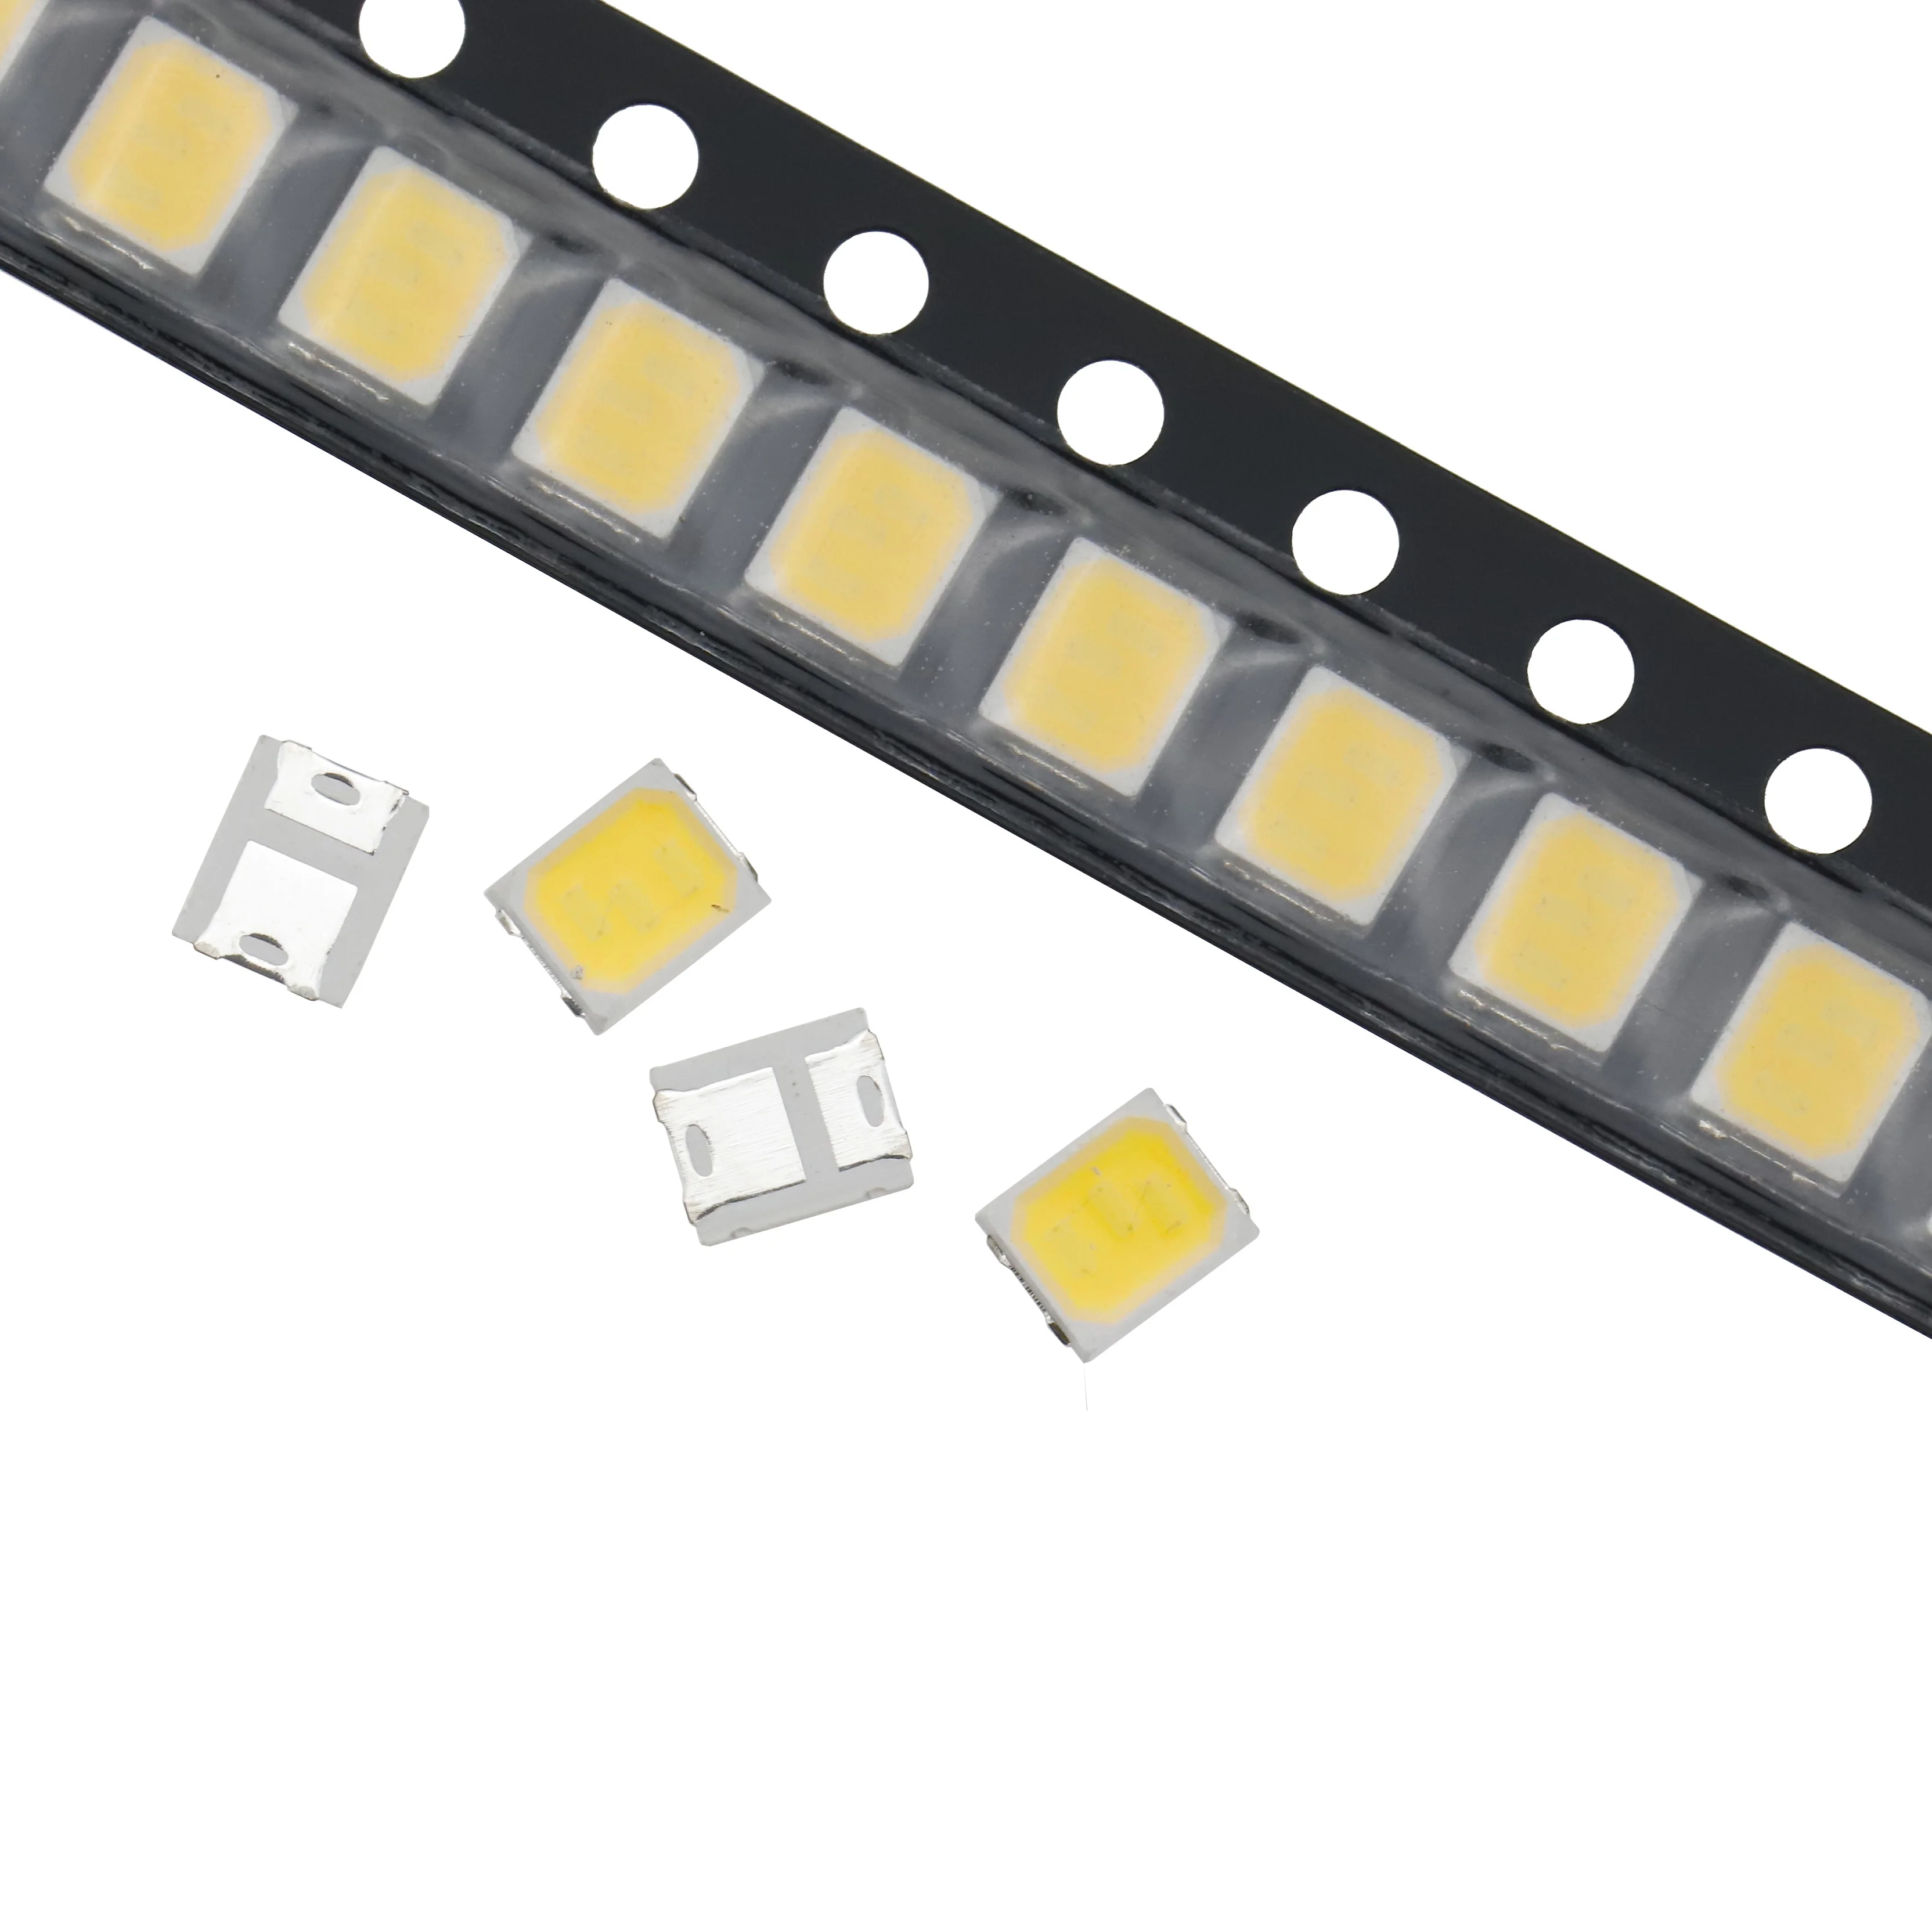 China factory pricehigh power dimmable SMD 2835 3000K-6500K led chip